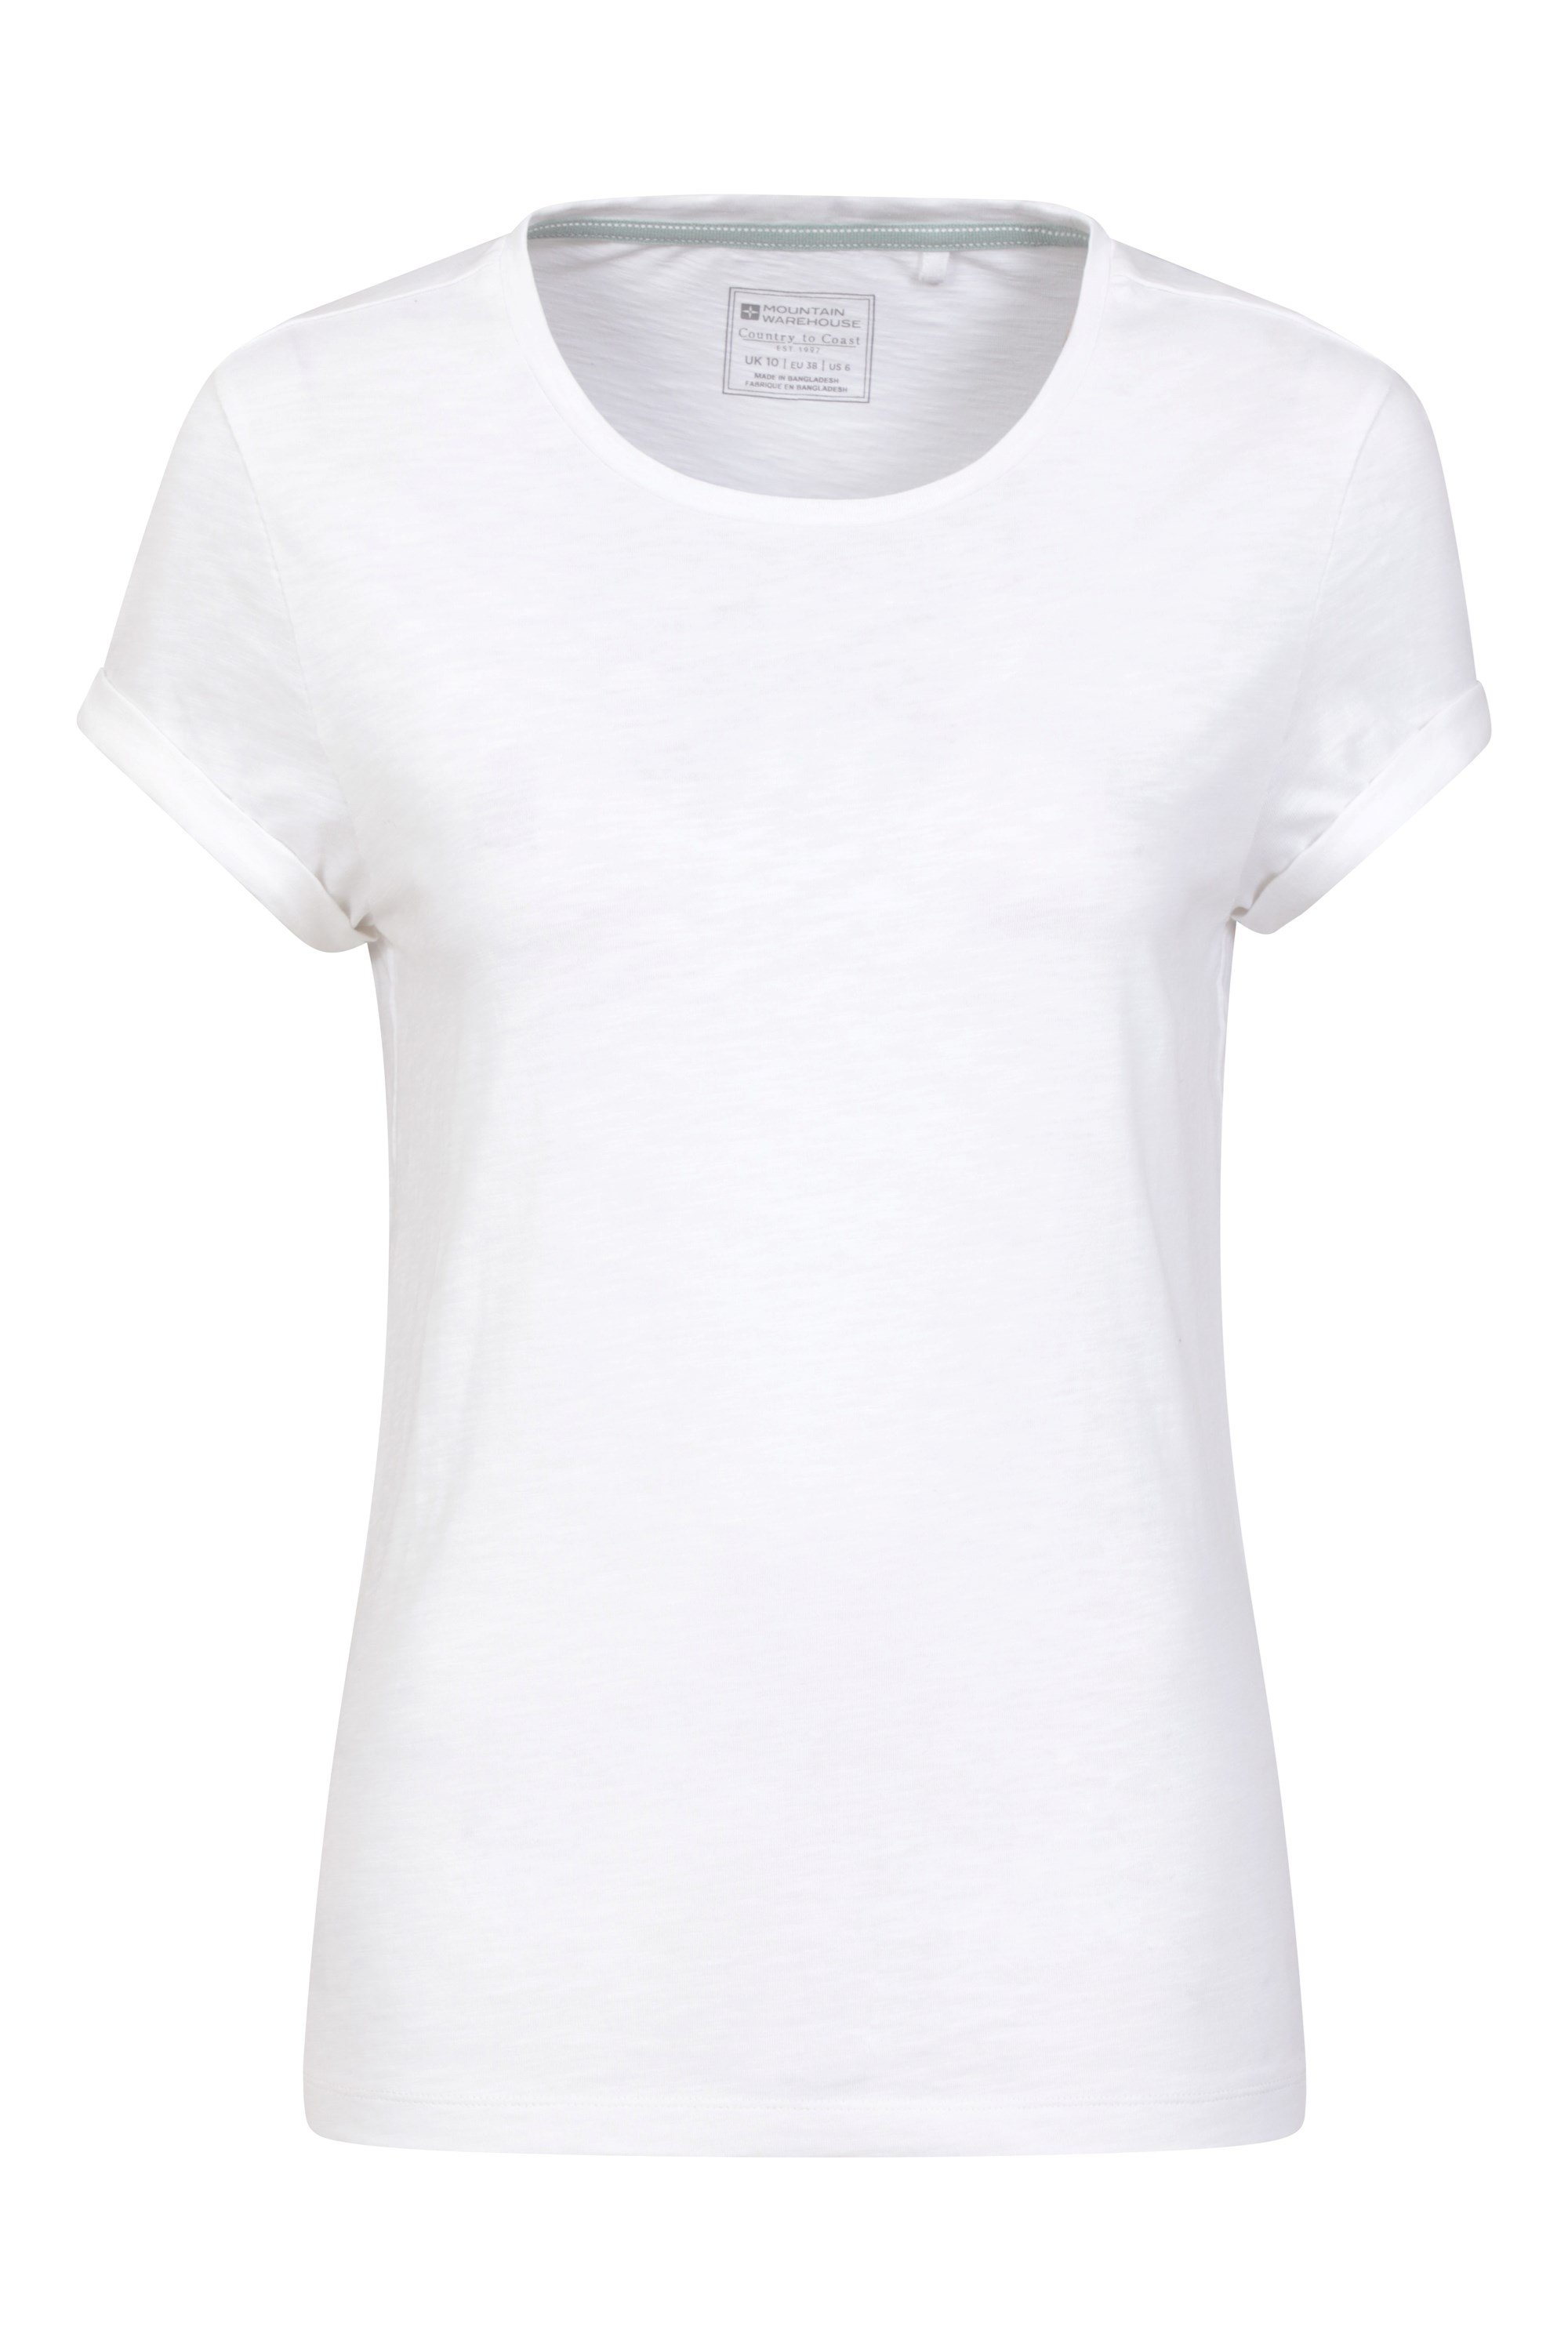 Bude Womens Relaxed Fit T-shirt - White